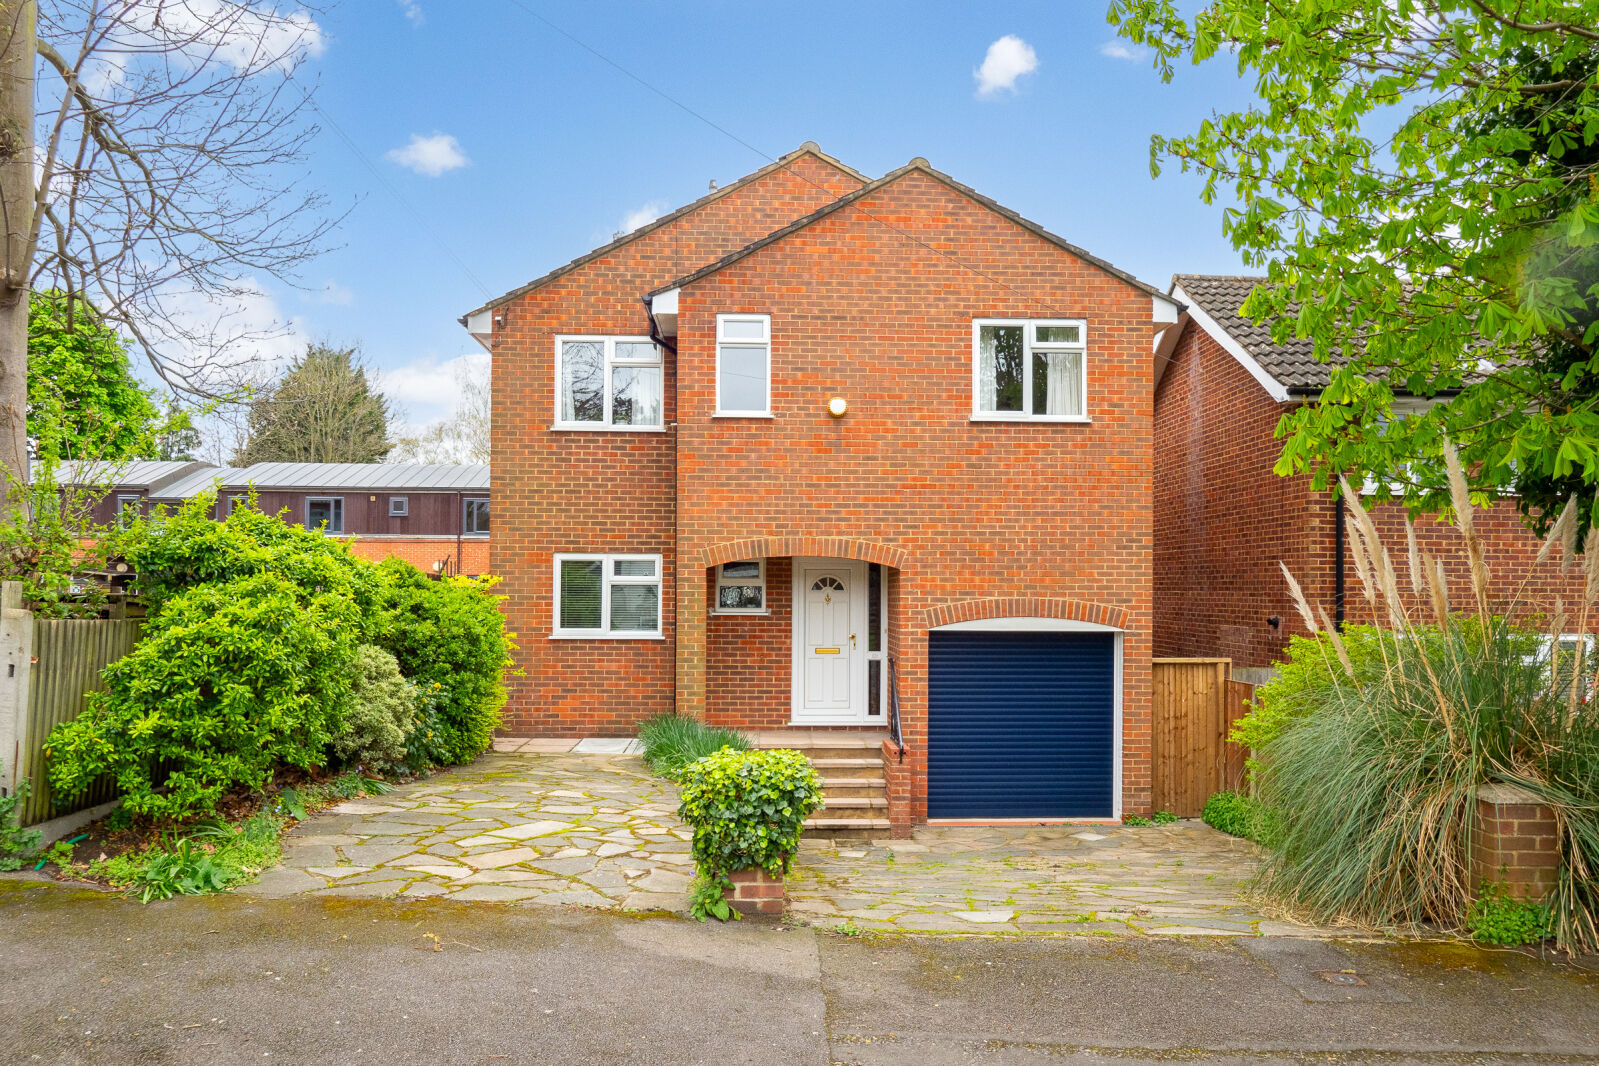 3 bedroom detached house for sale York Road, Cheam, SM2, main image